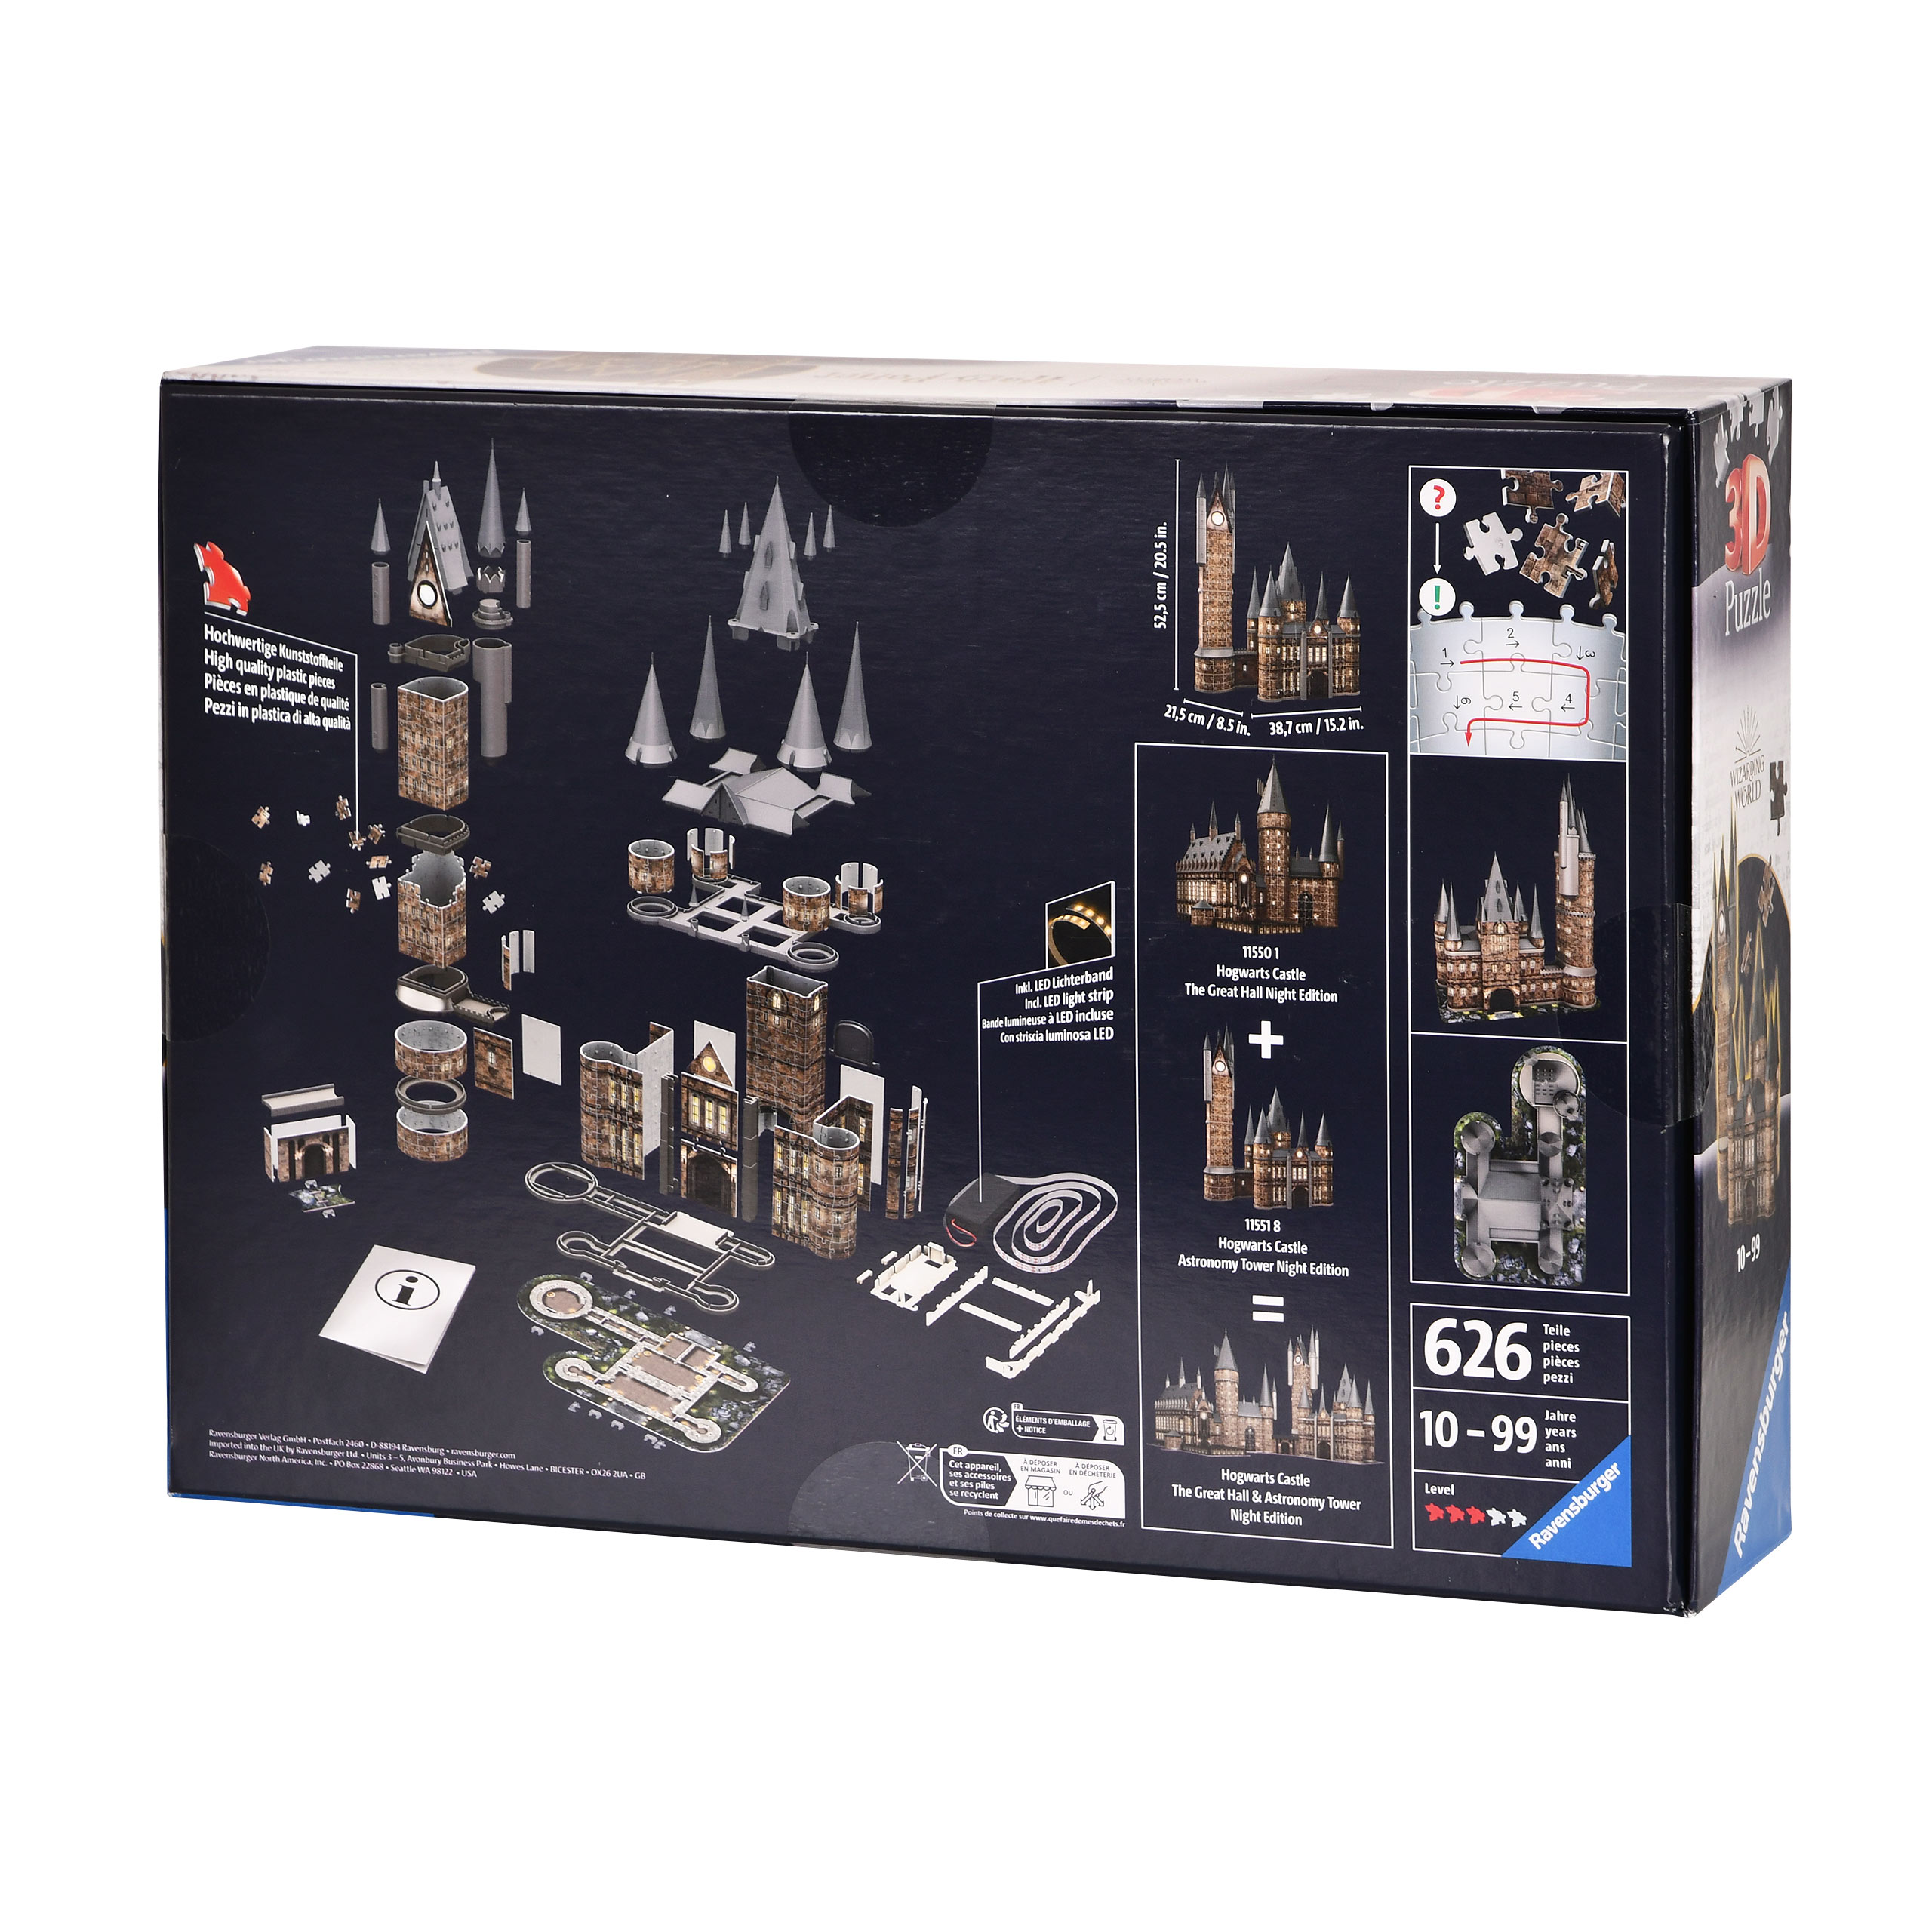 Hogwarts Castle Astronomy Tower 3D Puzzle with Lighting - Harry Potter